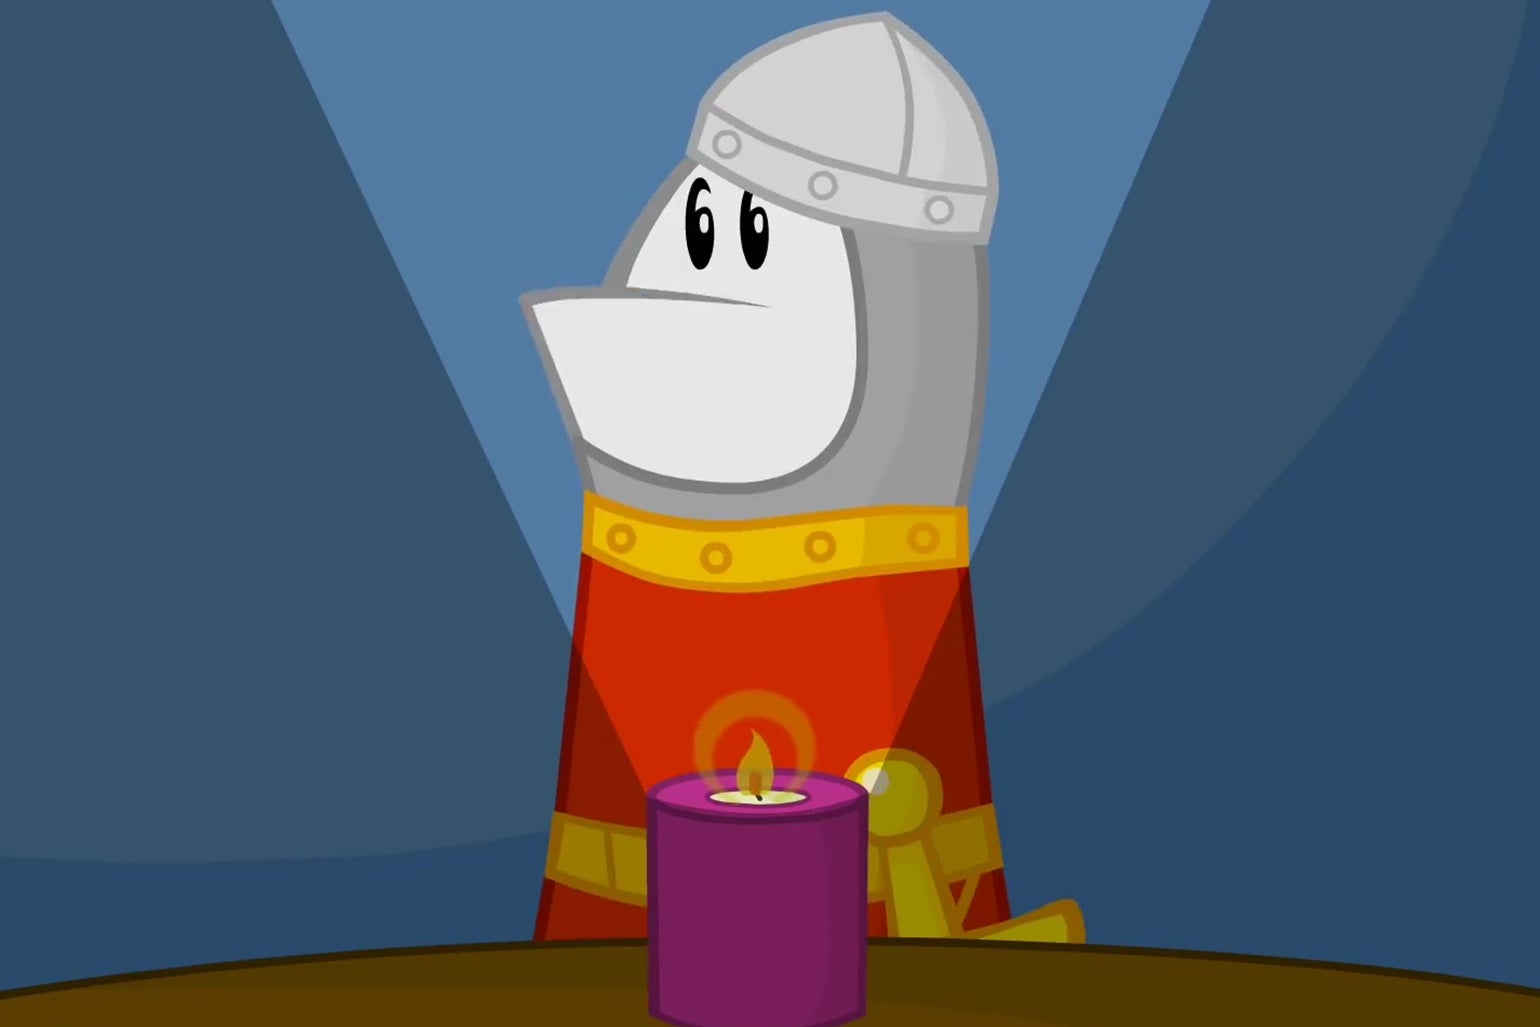 Animated character Homestar Runner, in a Dirk the Daring costume, leans over a scented candle to tell a scary story.